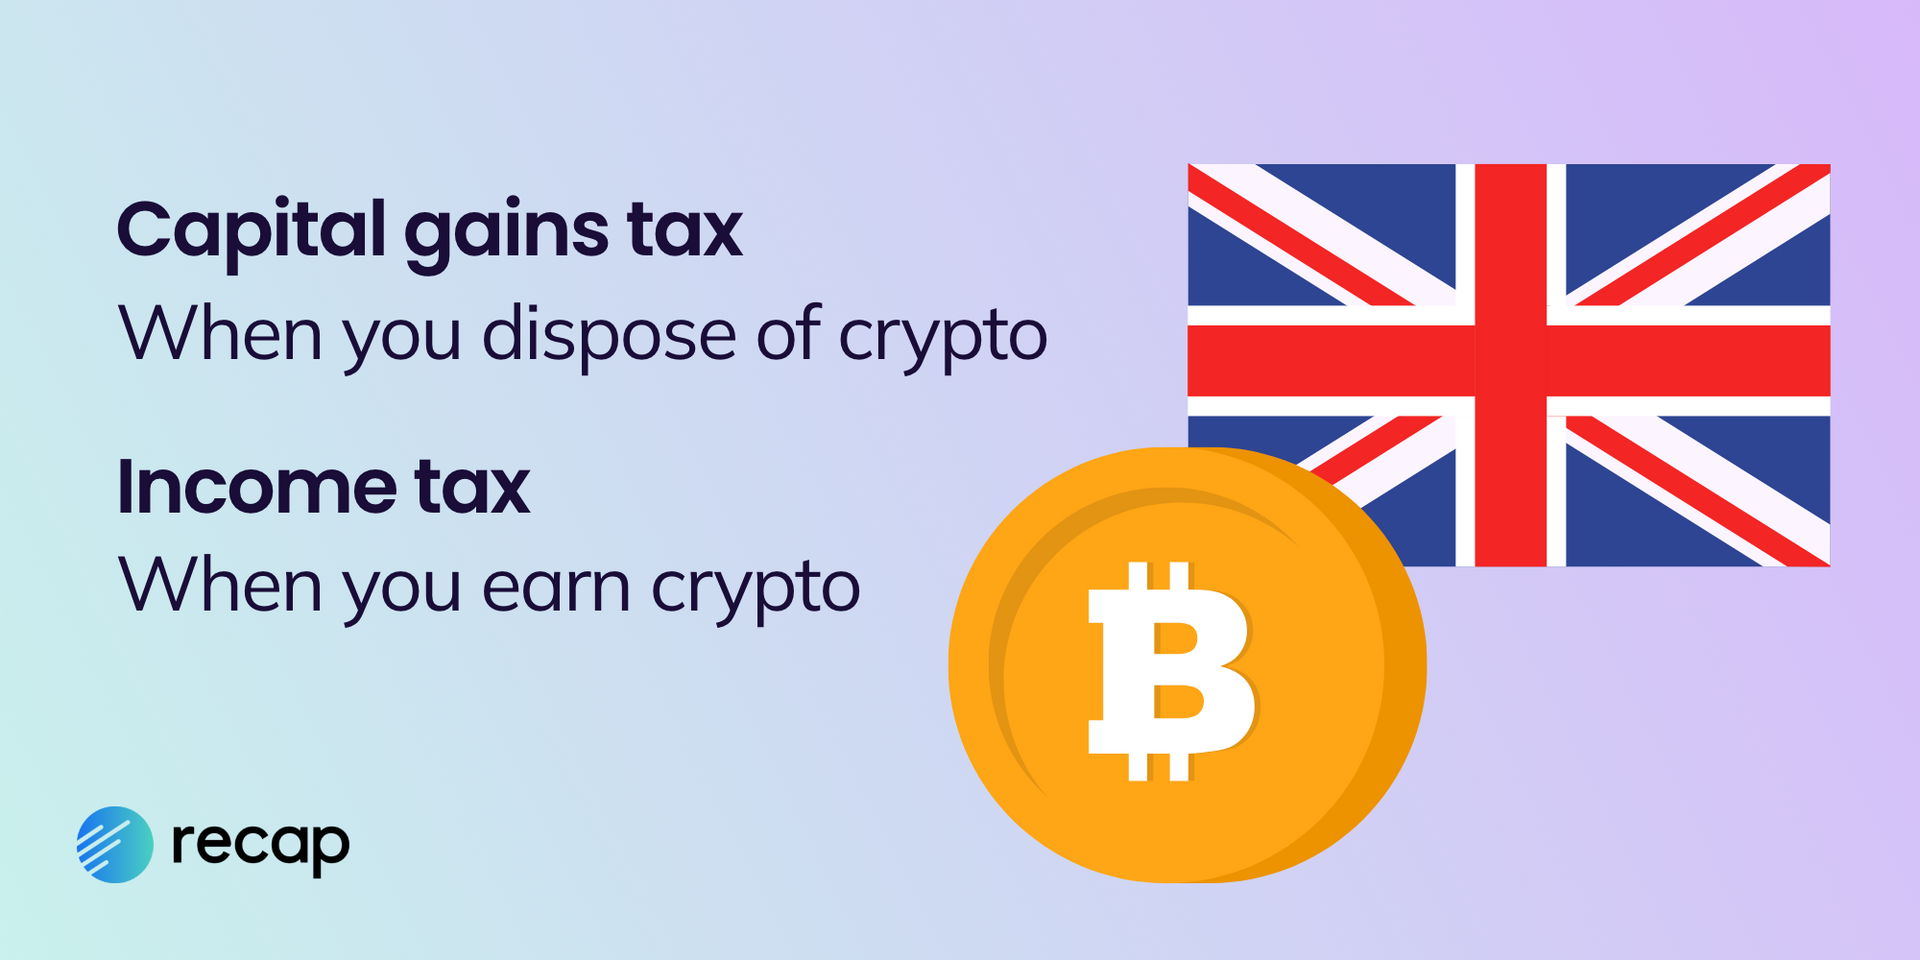 Illustration explaining that in the UK you will likely pay capital gains tax when you dipsose of crypto and income tax when you earn crypto.